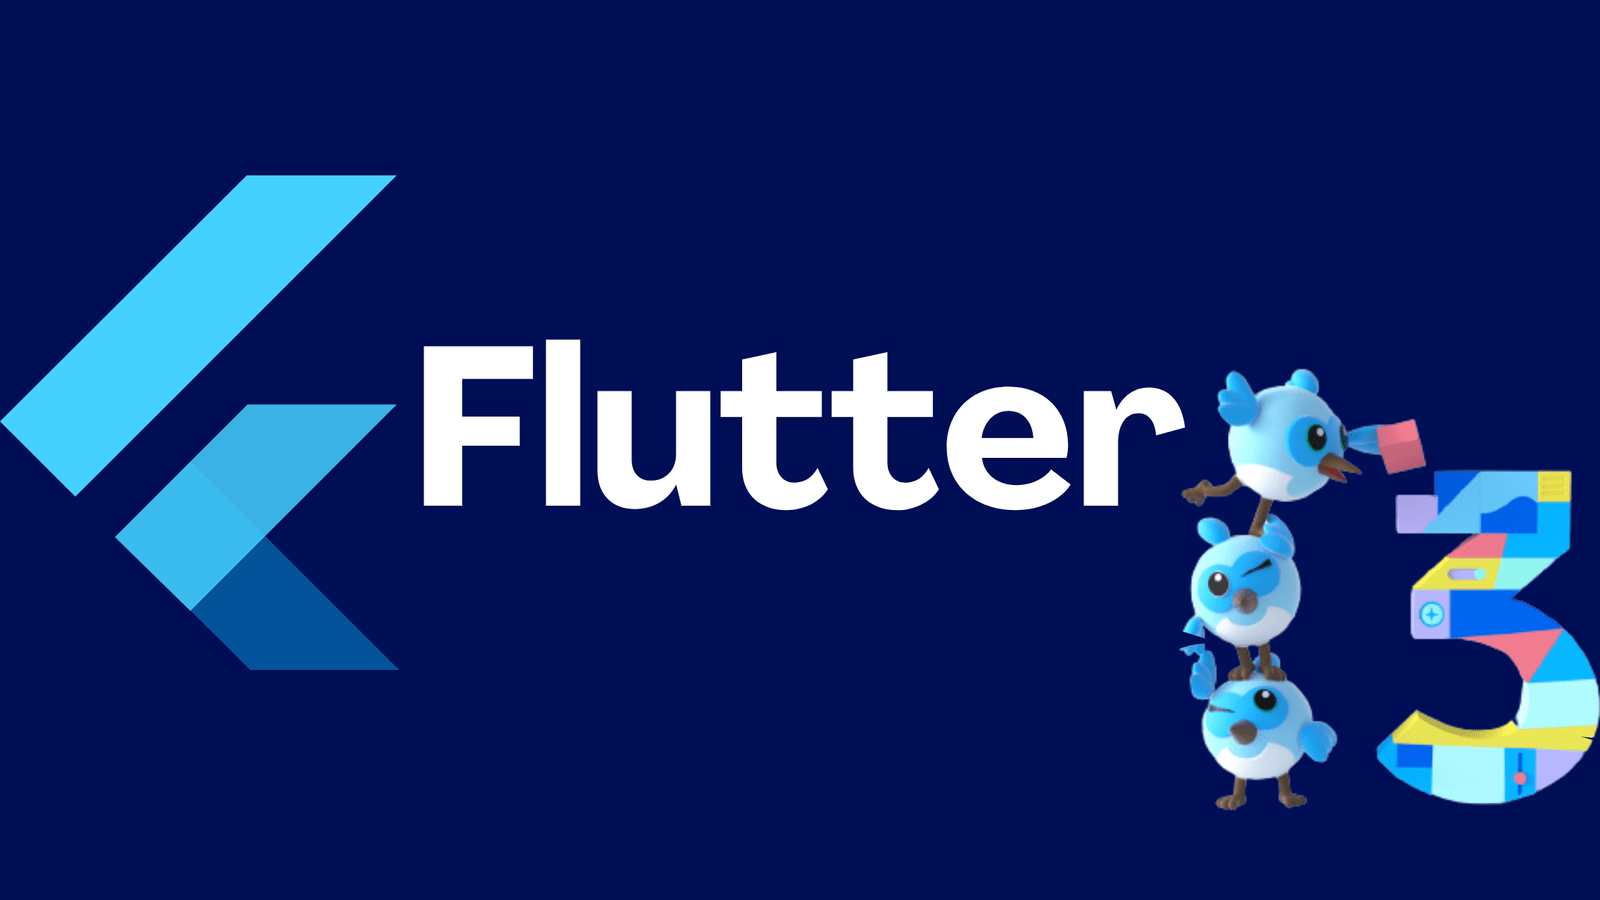 What’s new in Flutter 3